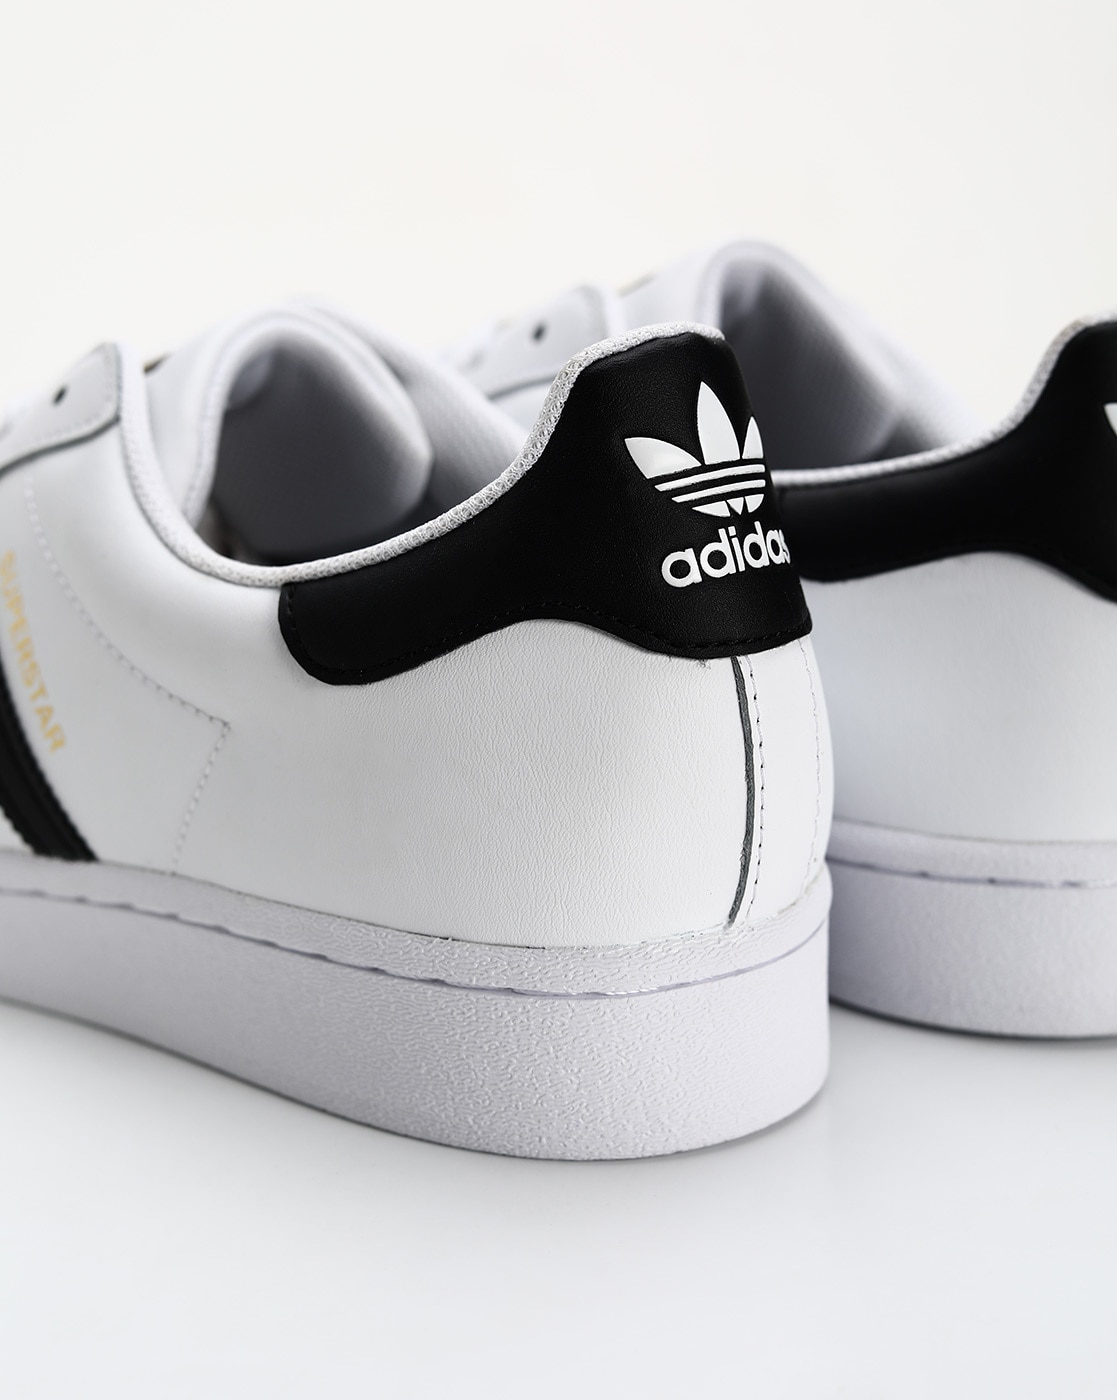 Mens Adidas White Shoes | vlr.eng.br